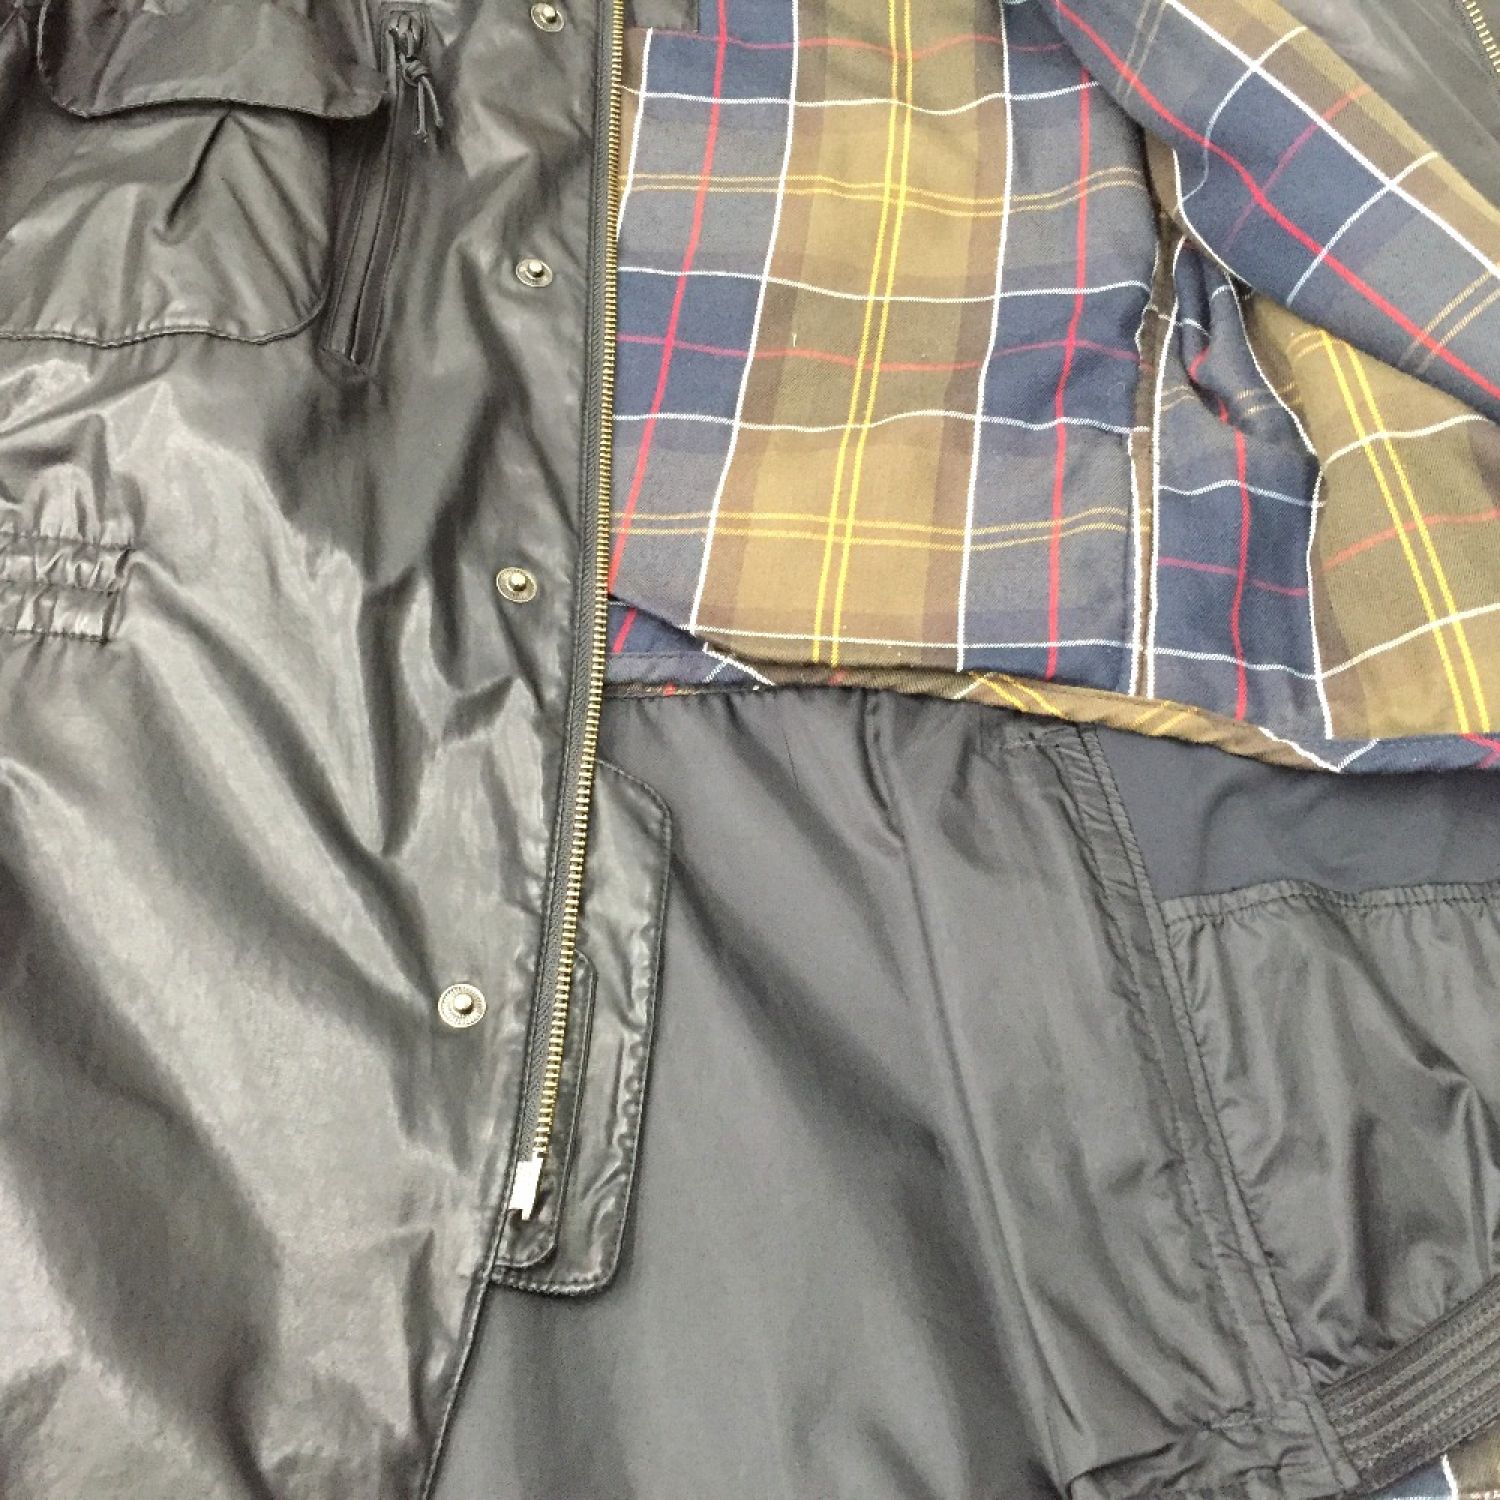 【Barbour】Beacon  BICYCLE JACKET フード ブルゾン